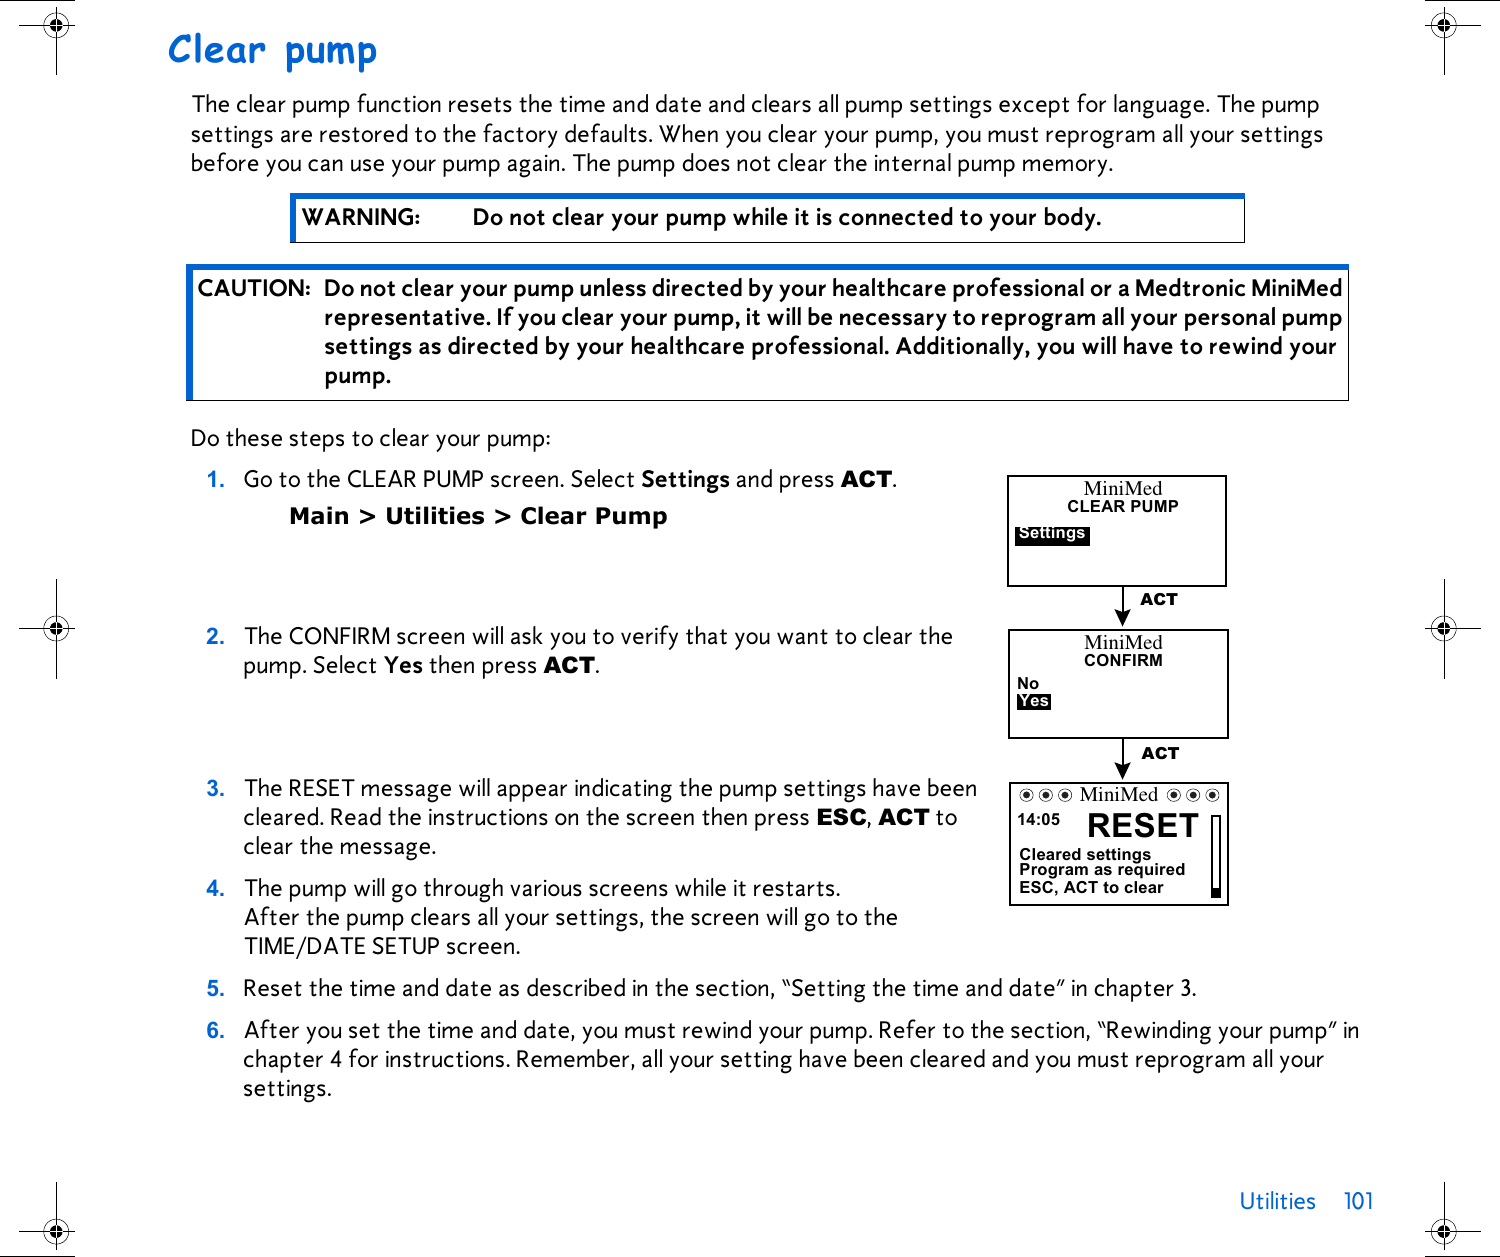 Utilities 101 Clear pumpThe clear pump function resets the time and date and clears all pump settings except for language. The pump settings are restored to the factory defaults. When you clear your pump, you must reprogram all your settings before you can use your pump again. The pump does not clear the internal pump memory.   Do these steps to clear your pump: 1. Go to the CLEAR PUMP screen. Select Settings and press ACT.Main &gt; Utilities &gt; Clear Pump2. The CONFIRM screen will ask you to verify that you want to clear the pump. Select Yes then press ACT.3. The RESET message will appear indicating the pump settings have been cleared. Read the instructions on the screen then press ESC, ACT to clear the message.4. The pump will go through various screens while it restarts. After the pump clears all your settings, the screen will go to the TIME/DATE SETUP screen.5. Reset the time and date as described in the section, “Setting the time and date” in chapter 3.6. After you set the time and date, you must rewind your pump. Refer to the section, “Rewinding your pump” in chapter 4 for instructions. Remember, all your setting have been cleared and you must reprogram all your settings.WARNING: Do not clear your pump while it is connected to your body.CAUTION: Do not clear your pump unless directed by your healthcare professional or a Medtronic MiniMed representative. If you clear your pump, it will be necessary to reprogram all your personal pump settings as directed by your healthcare professional. Additionally, you will have to rewind your pump.MiniMedCLEAR PUMPSettingsACTMiniMedCONFIRMYesNoACT14:05 RESETCleared settingsProgram as requiredESC, ACT to clearMiniMed